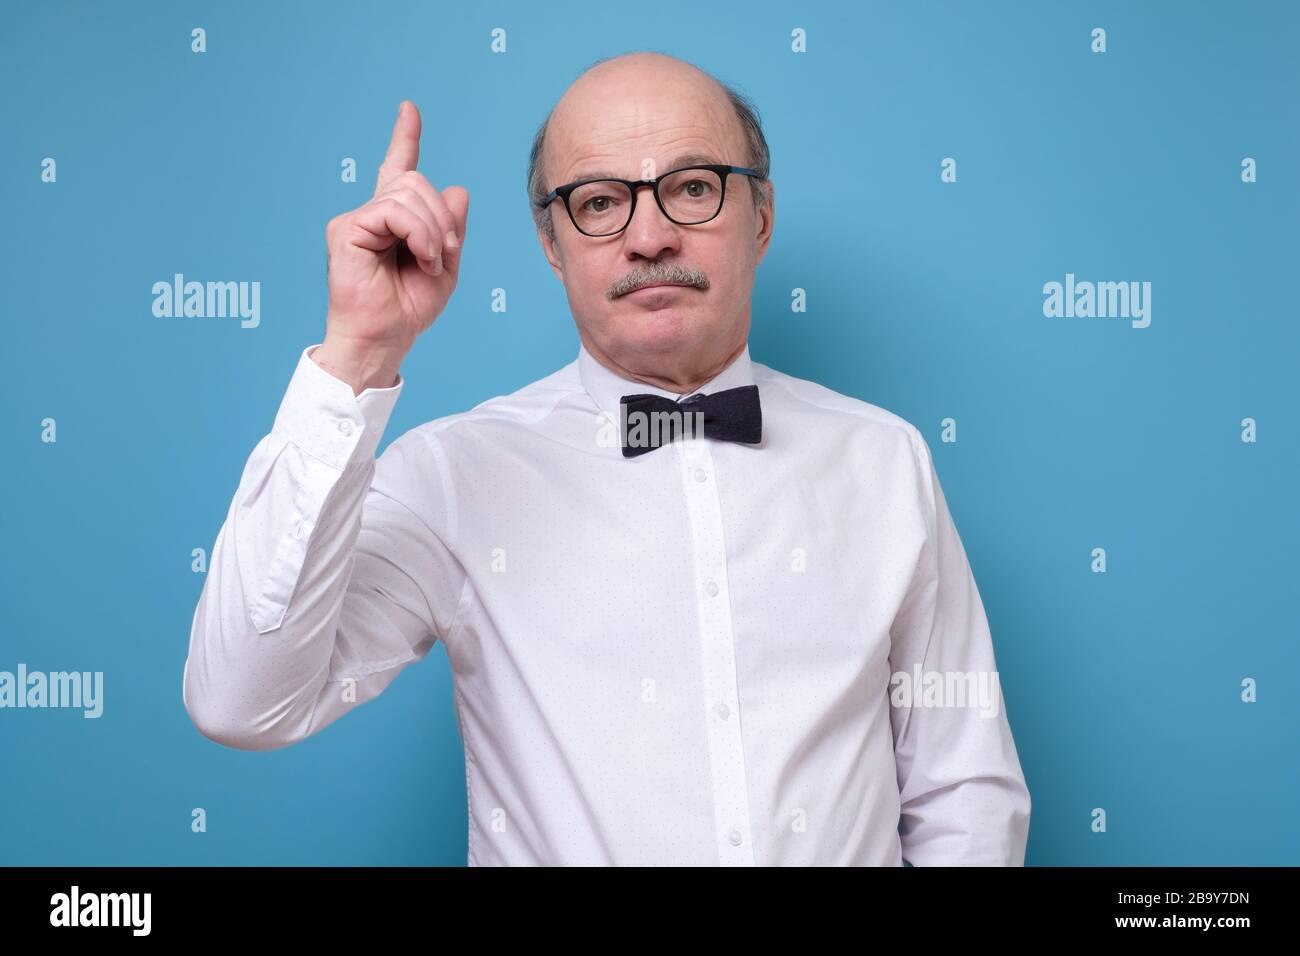 Strict senior man showing index fingers up, giving advice Stock Photo